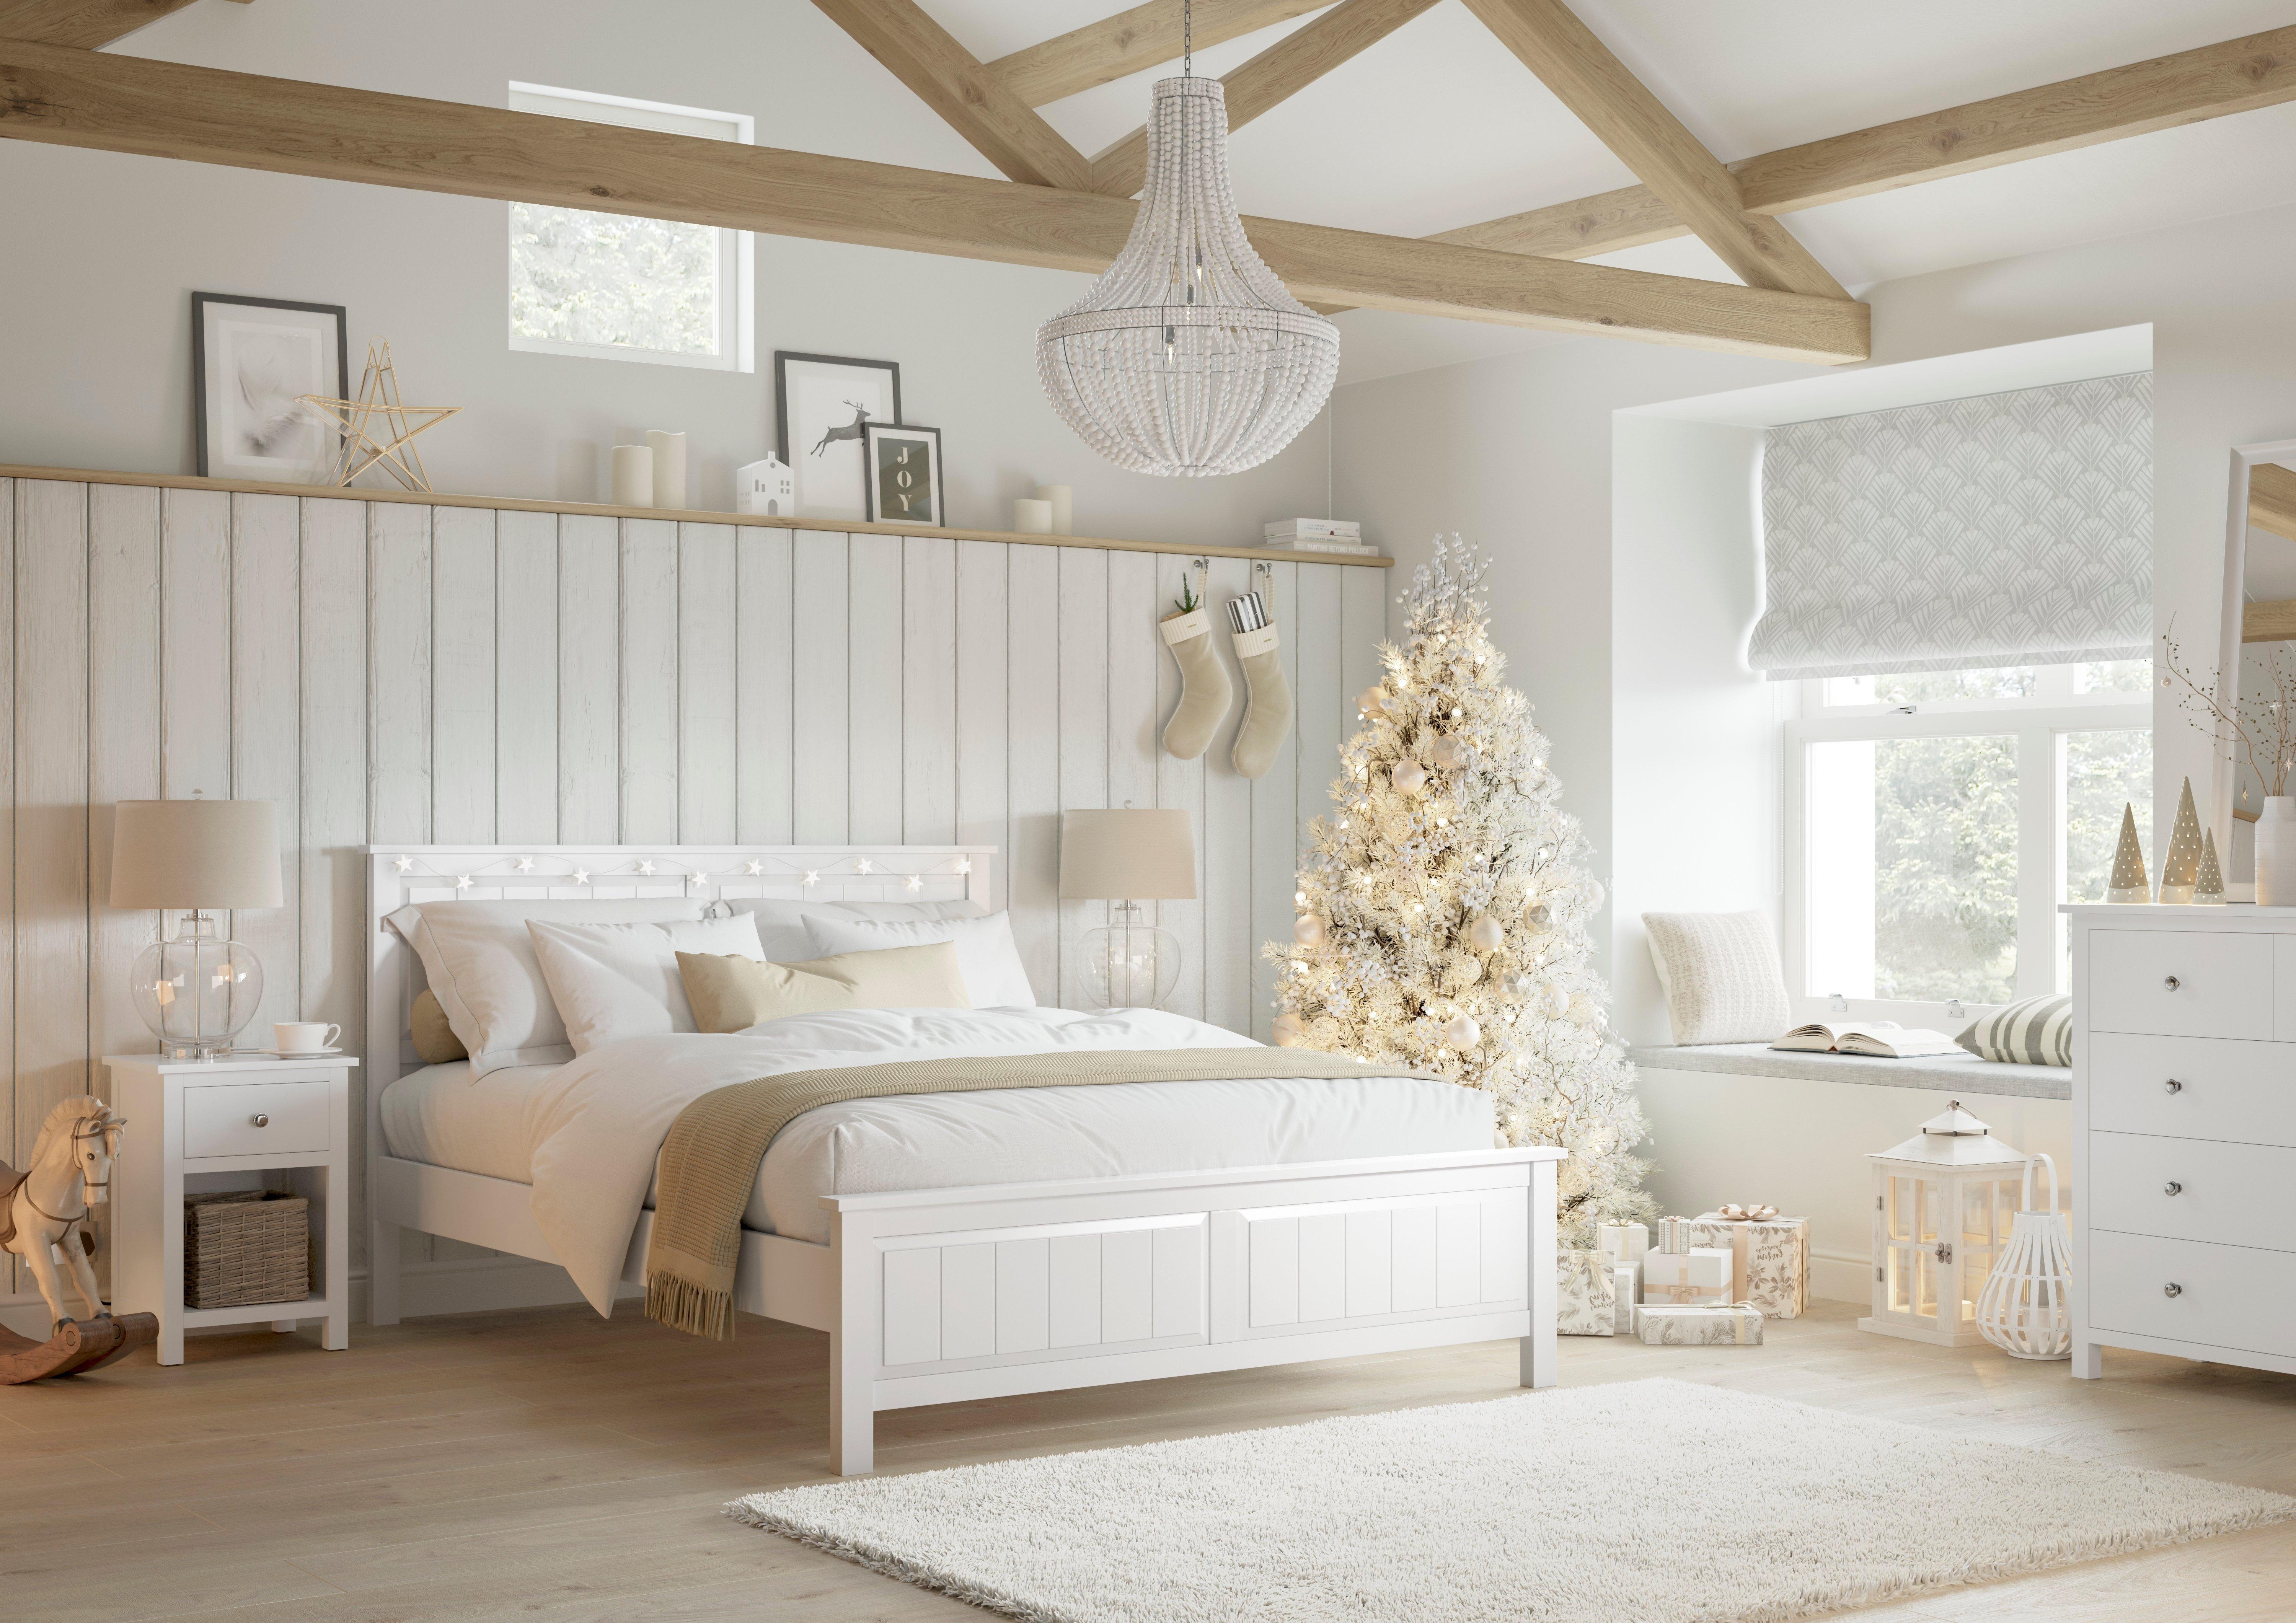 Dreaming of an all-white Christmas bedroom?